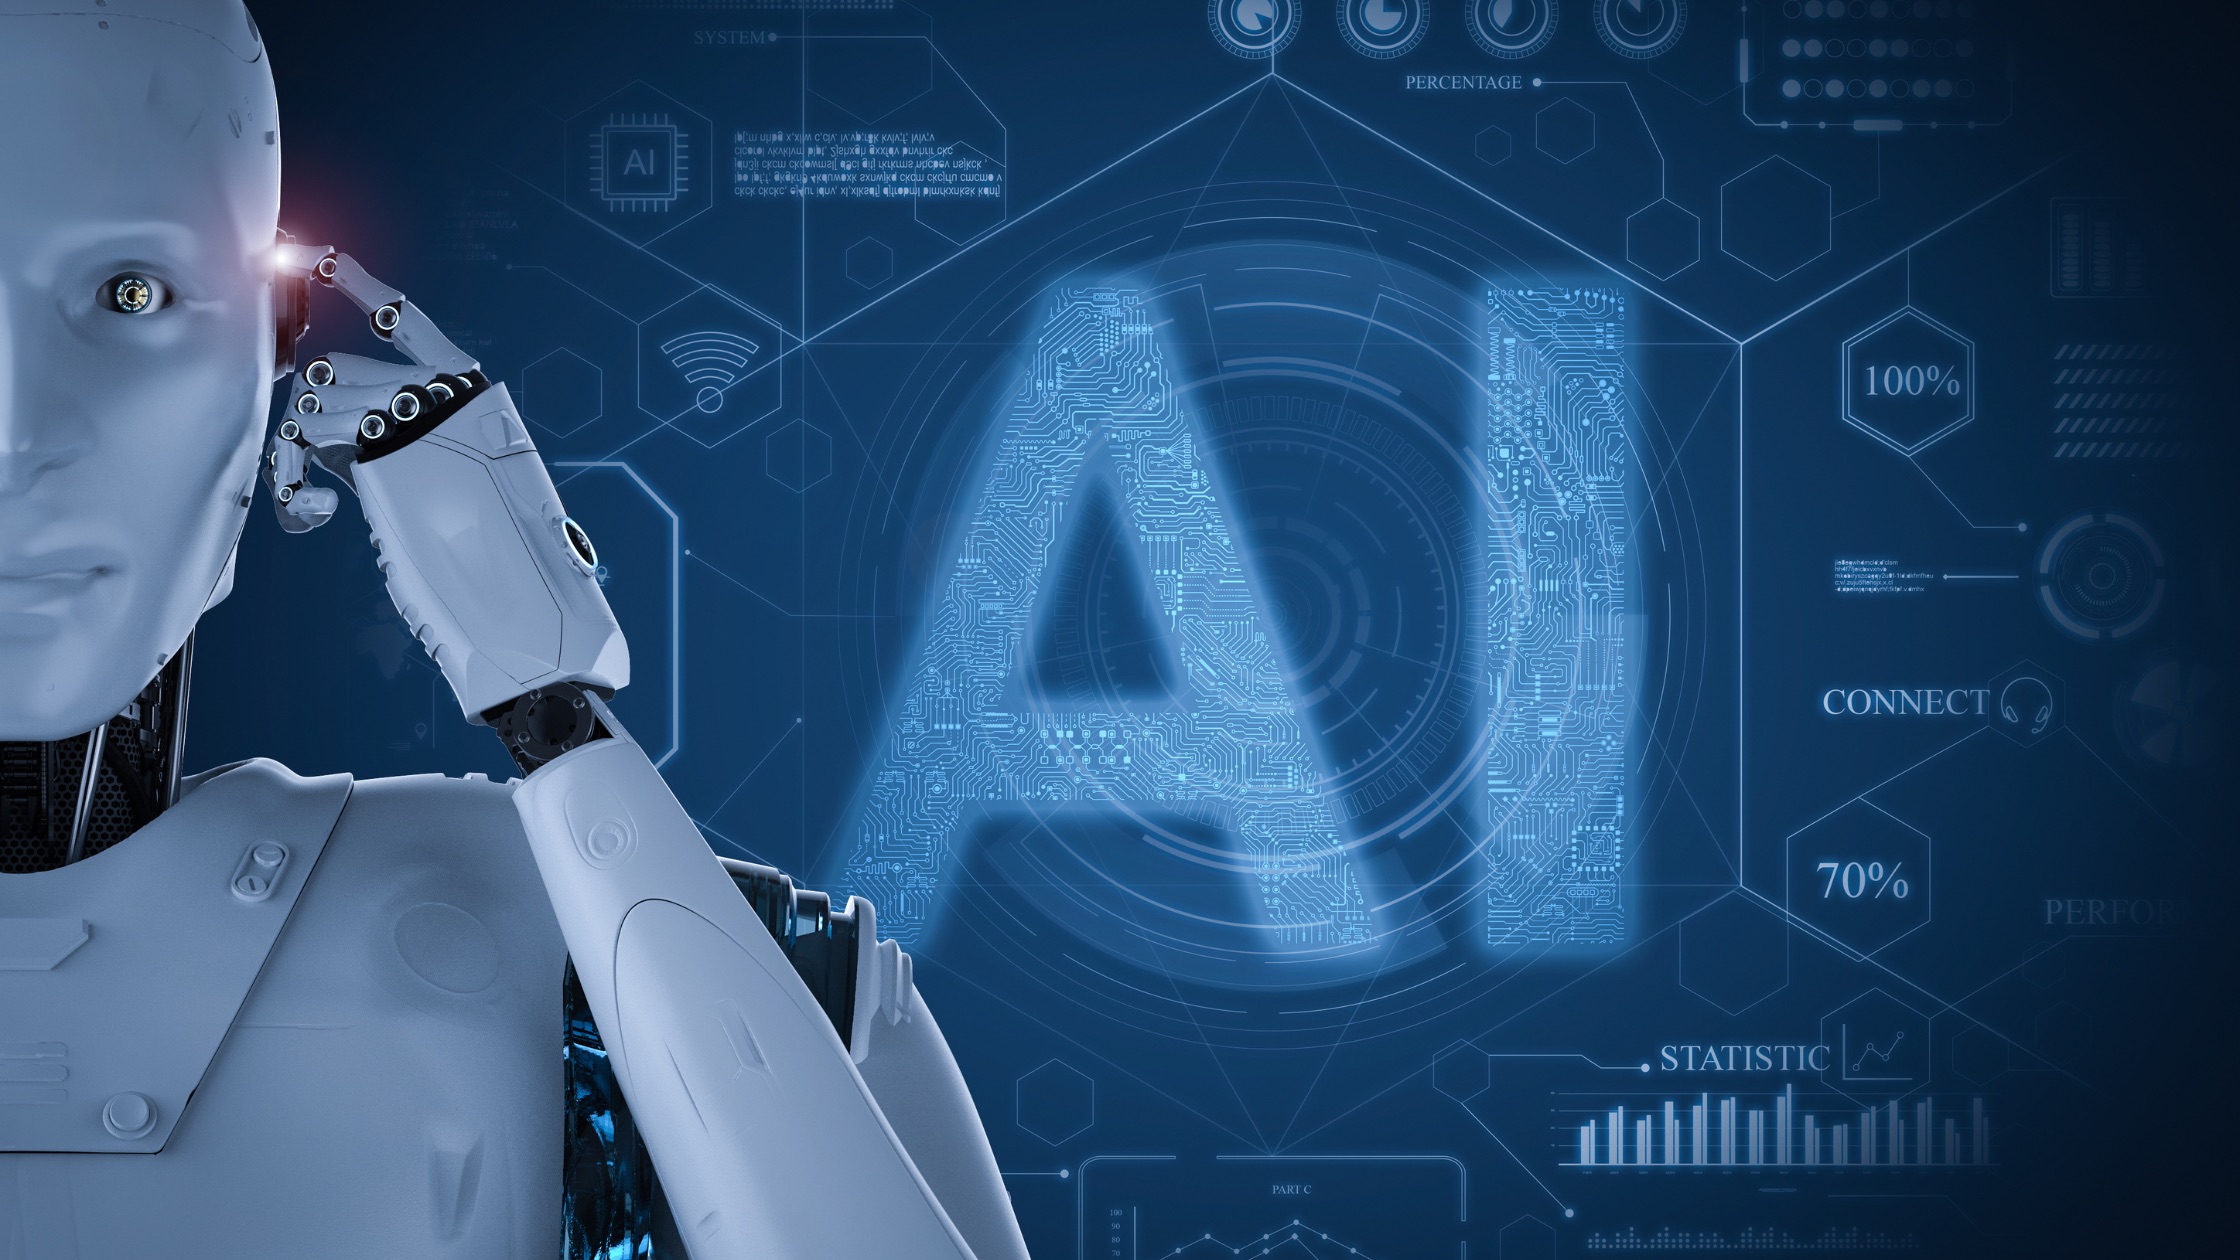 Our Expert Review of 6 AI Tools + Our Recommended Use